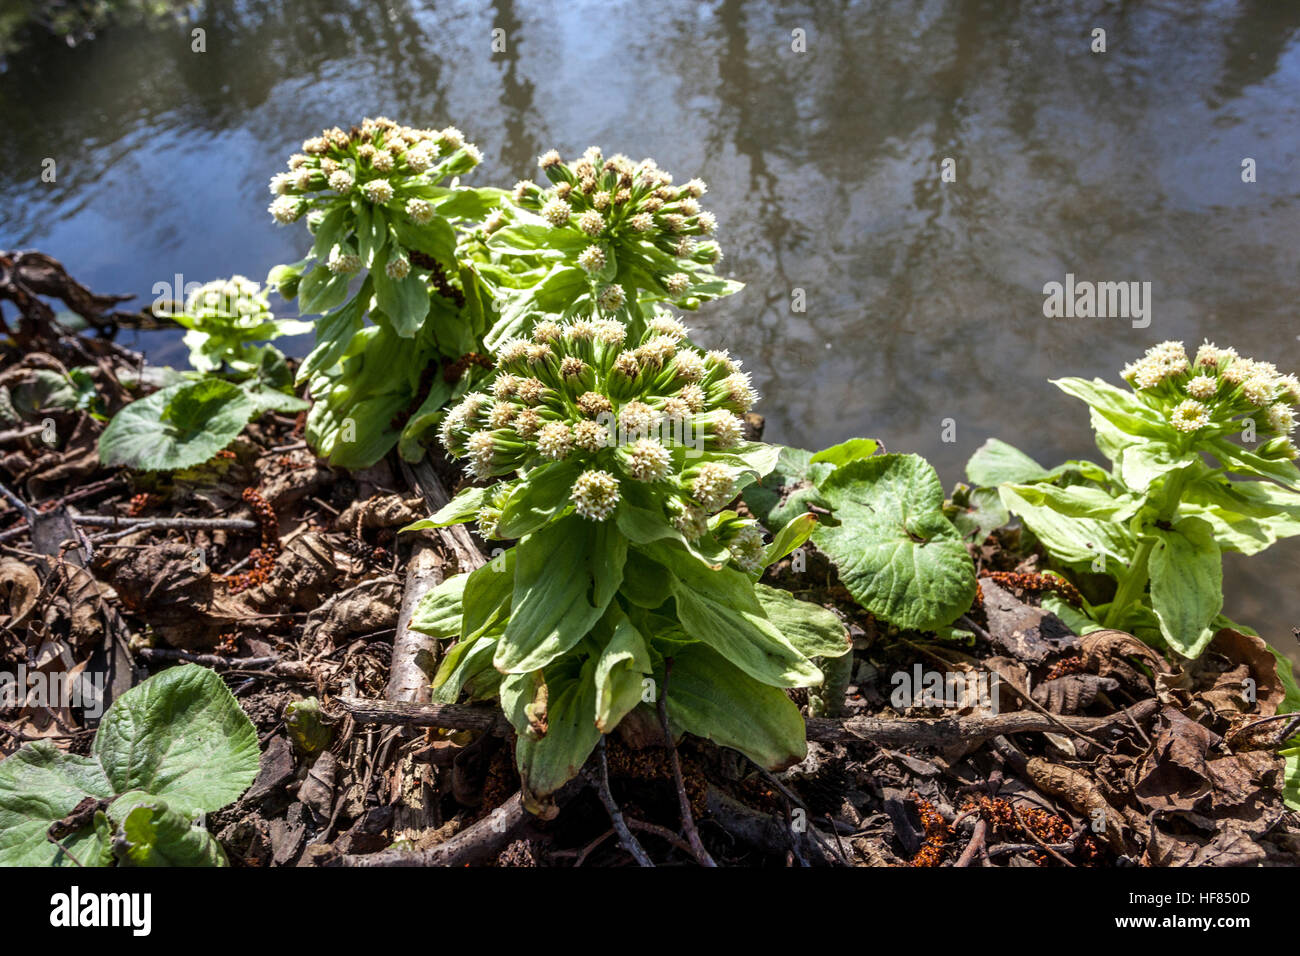 Leaves and flowers sprouting from the ground, Petasites japonicus also known as Japanese Giant butterbur or fuki, early spring Stock Photo